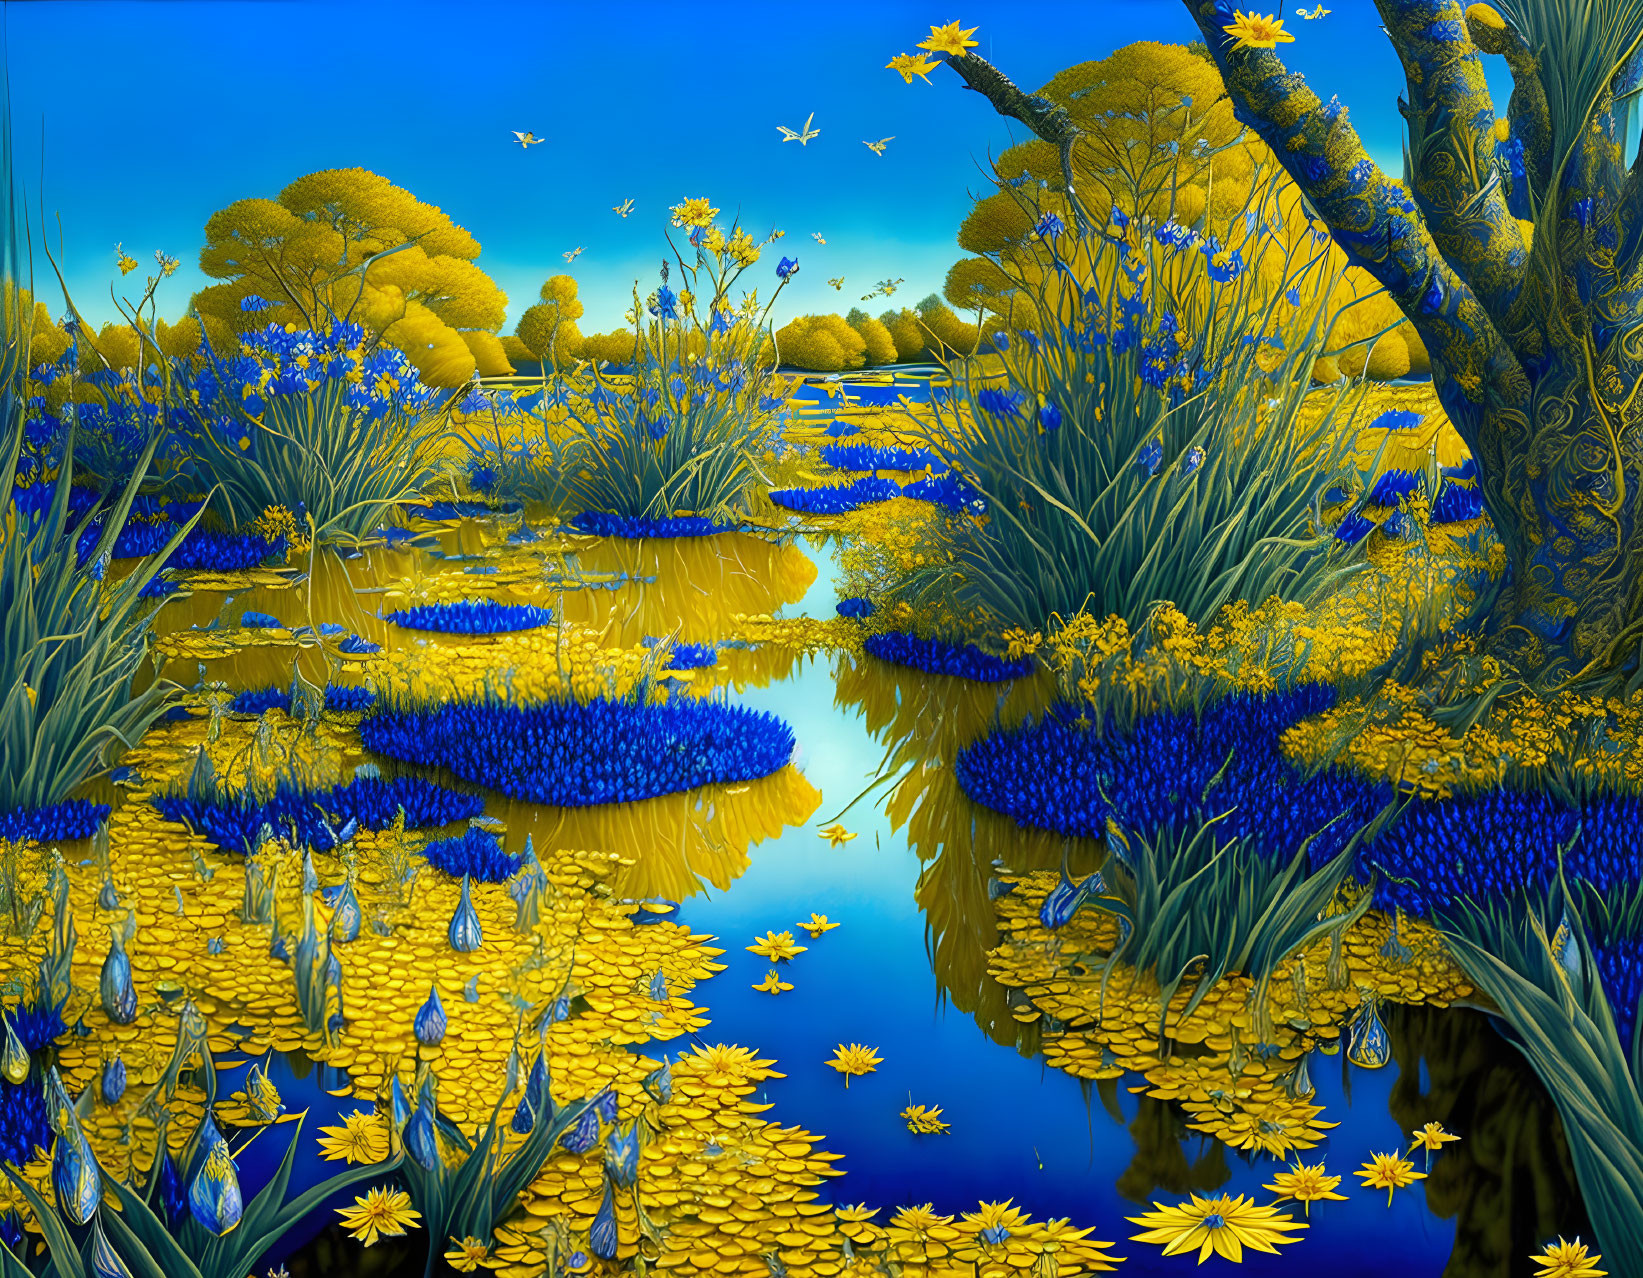 Fantastical landscape with blue and yellow hues, intricate nature elements, and butterflies